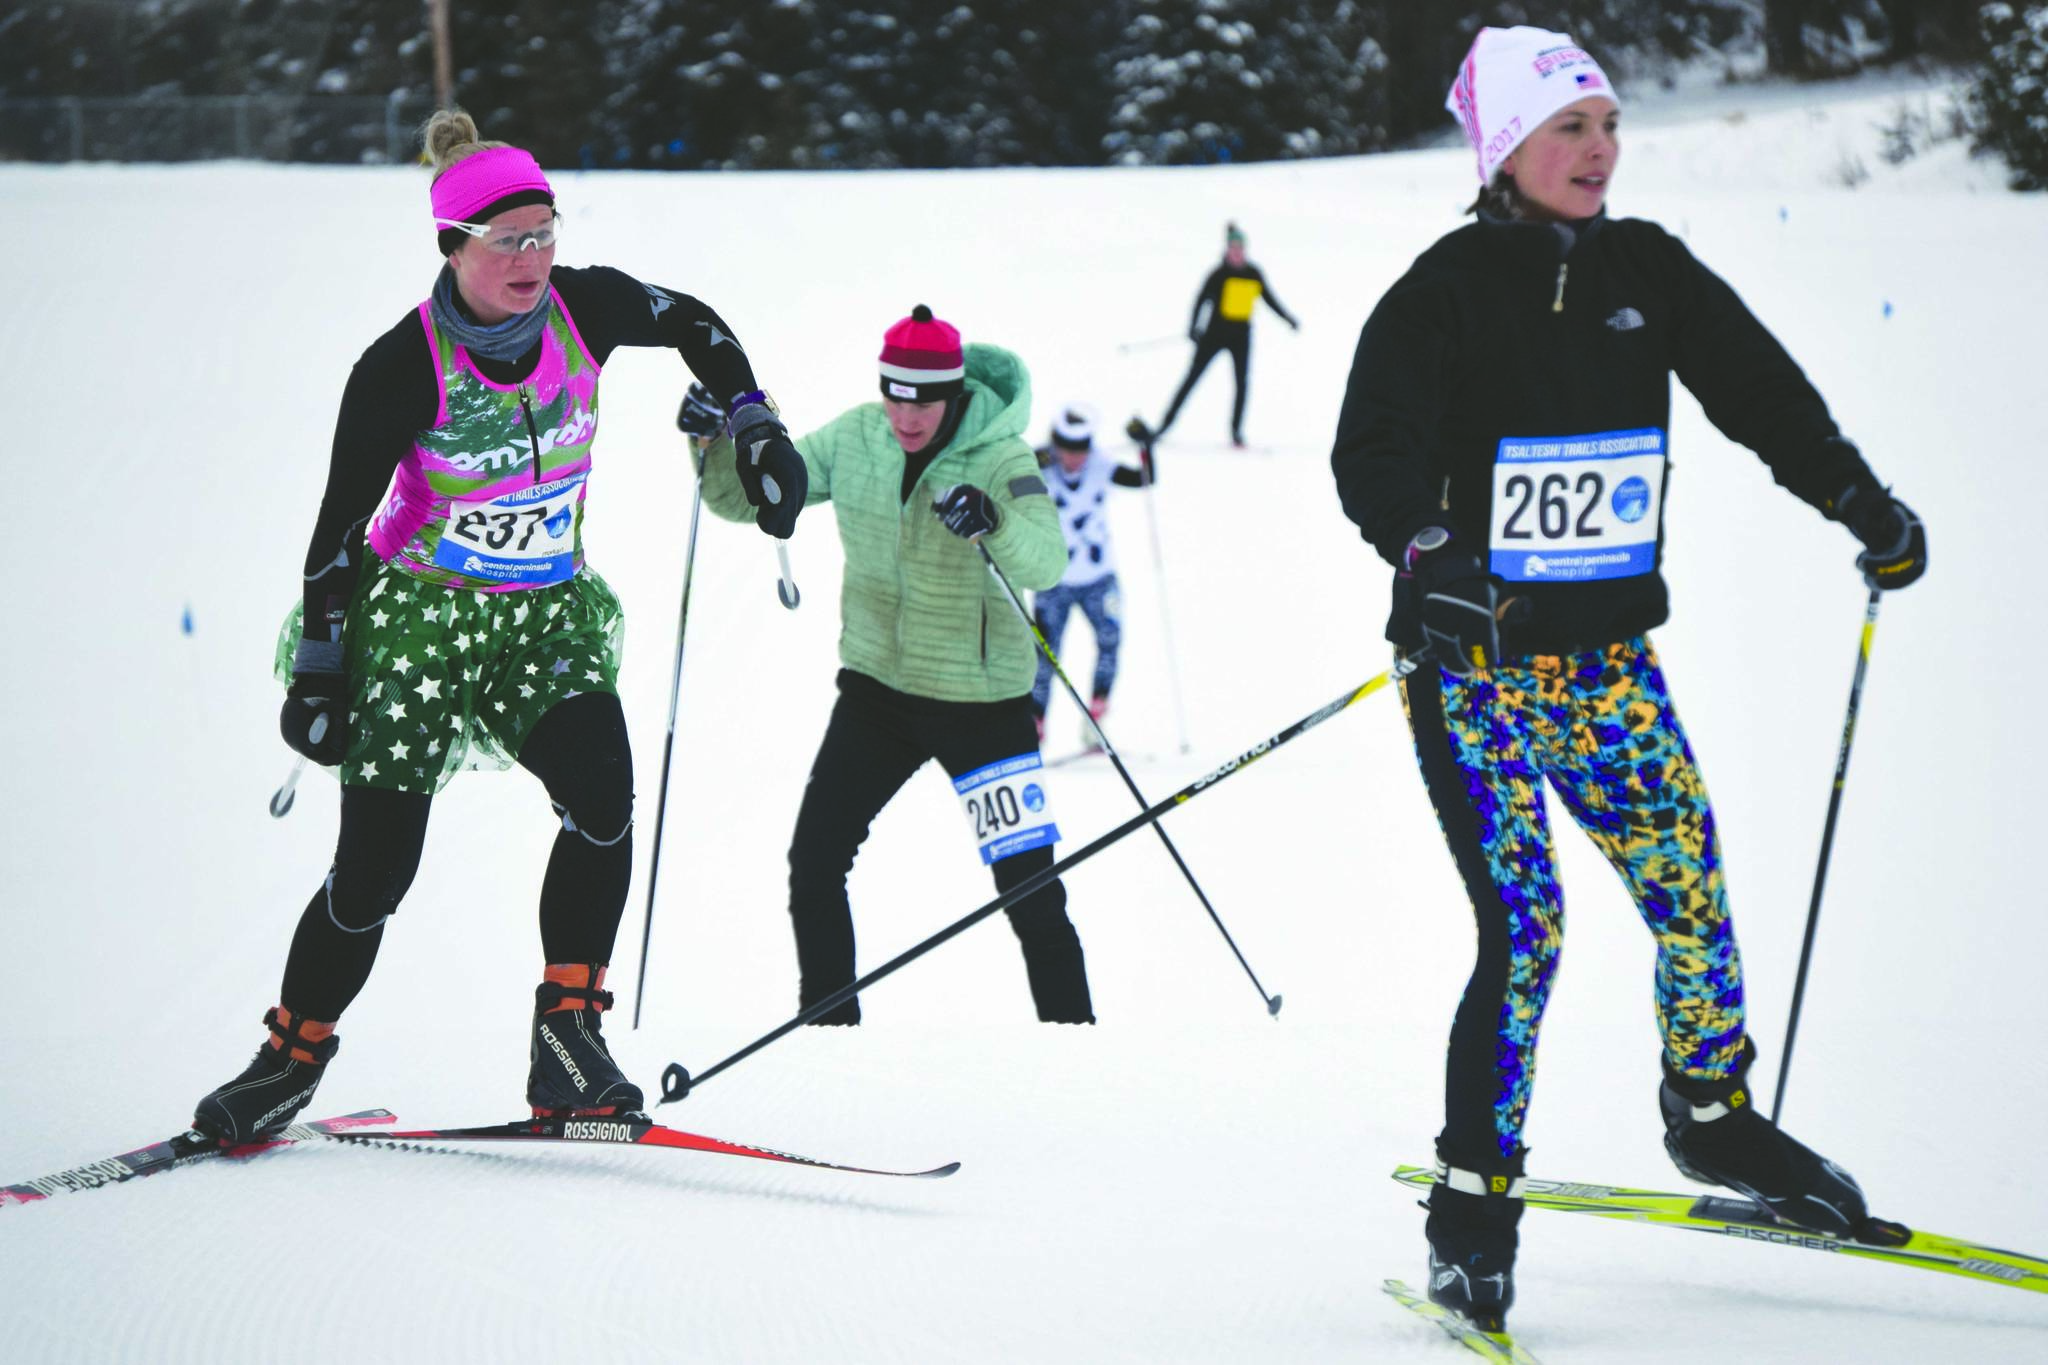 Eventual race winner Morgan Aldridge chases Libby Jensen, who finished third, and is chased by Amy Anderson, who took second, at the Ski for Women on Sunday, Feb. 2, 2020, at Tsalteshi Trails just outside of Soldotna. (Photo by Jeff Helminiak/Peninsula Clarion)